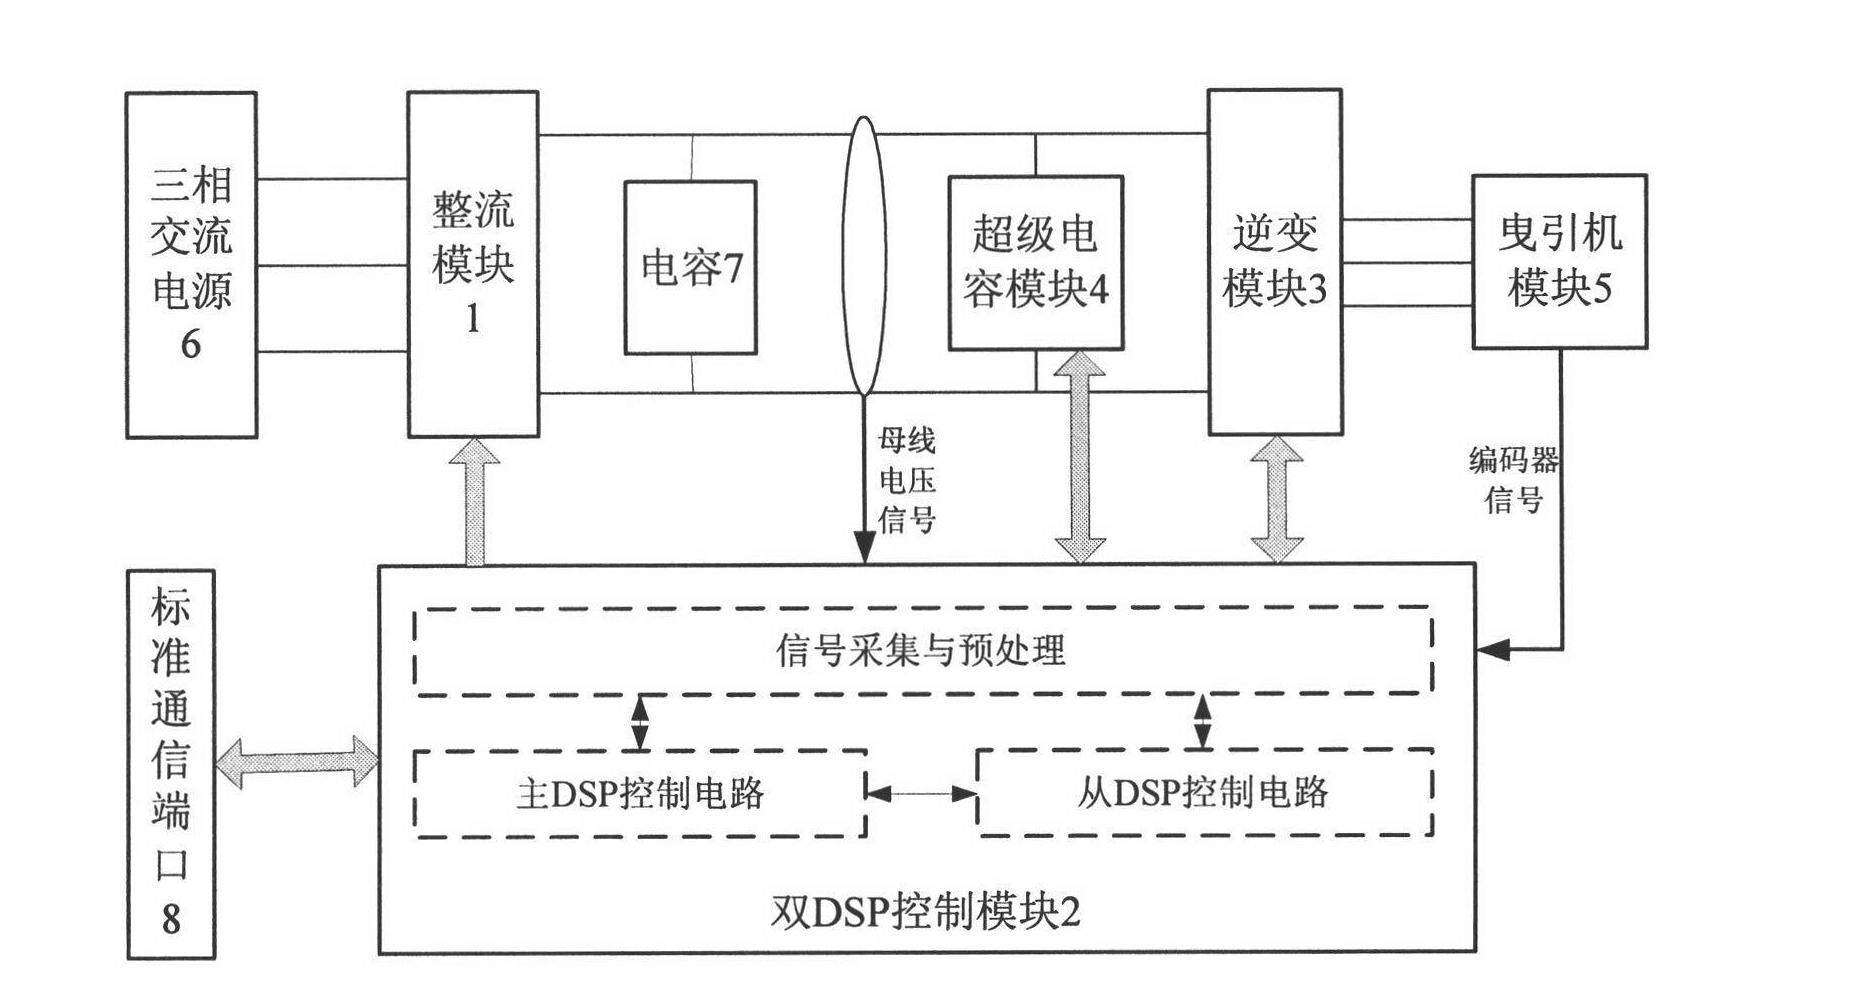 Double digital signal processor(DSP)-based elevator drive, control and energy conservation integrated system and method